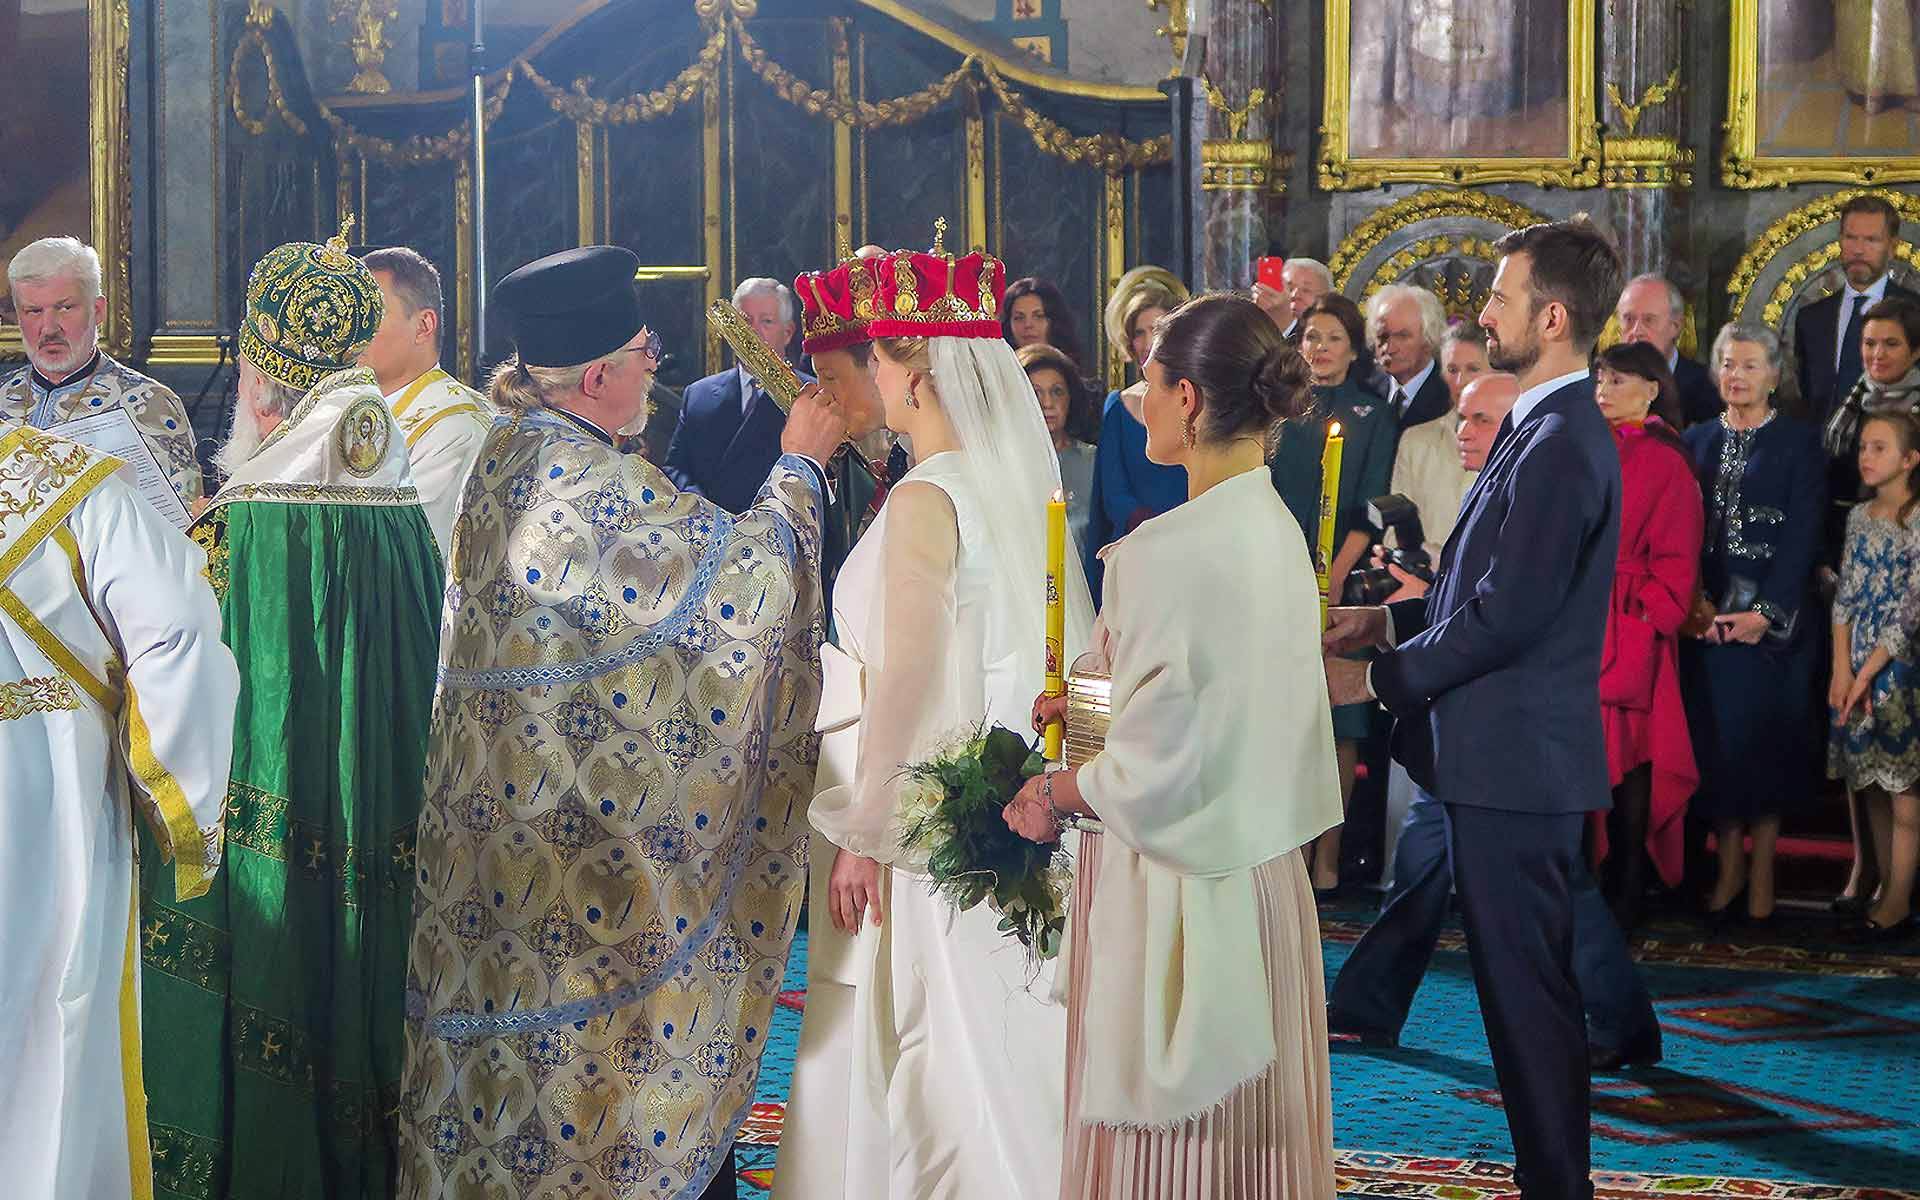 A-Royal-wedding-of-Prince-Philip-of-Serbia-and-Danica-Marinkovic-in-Serbia